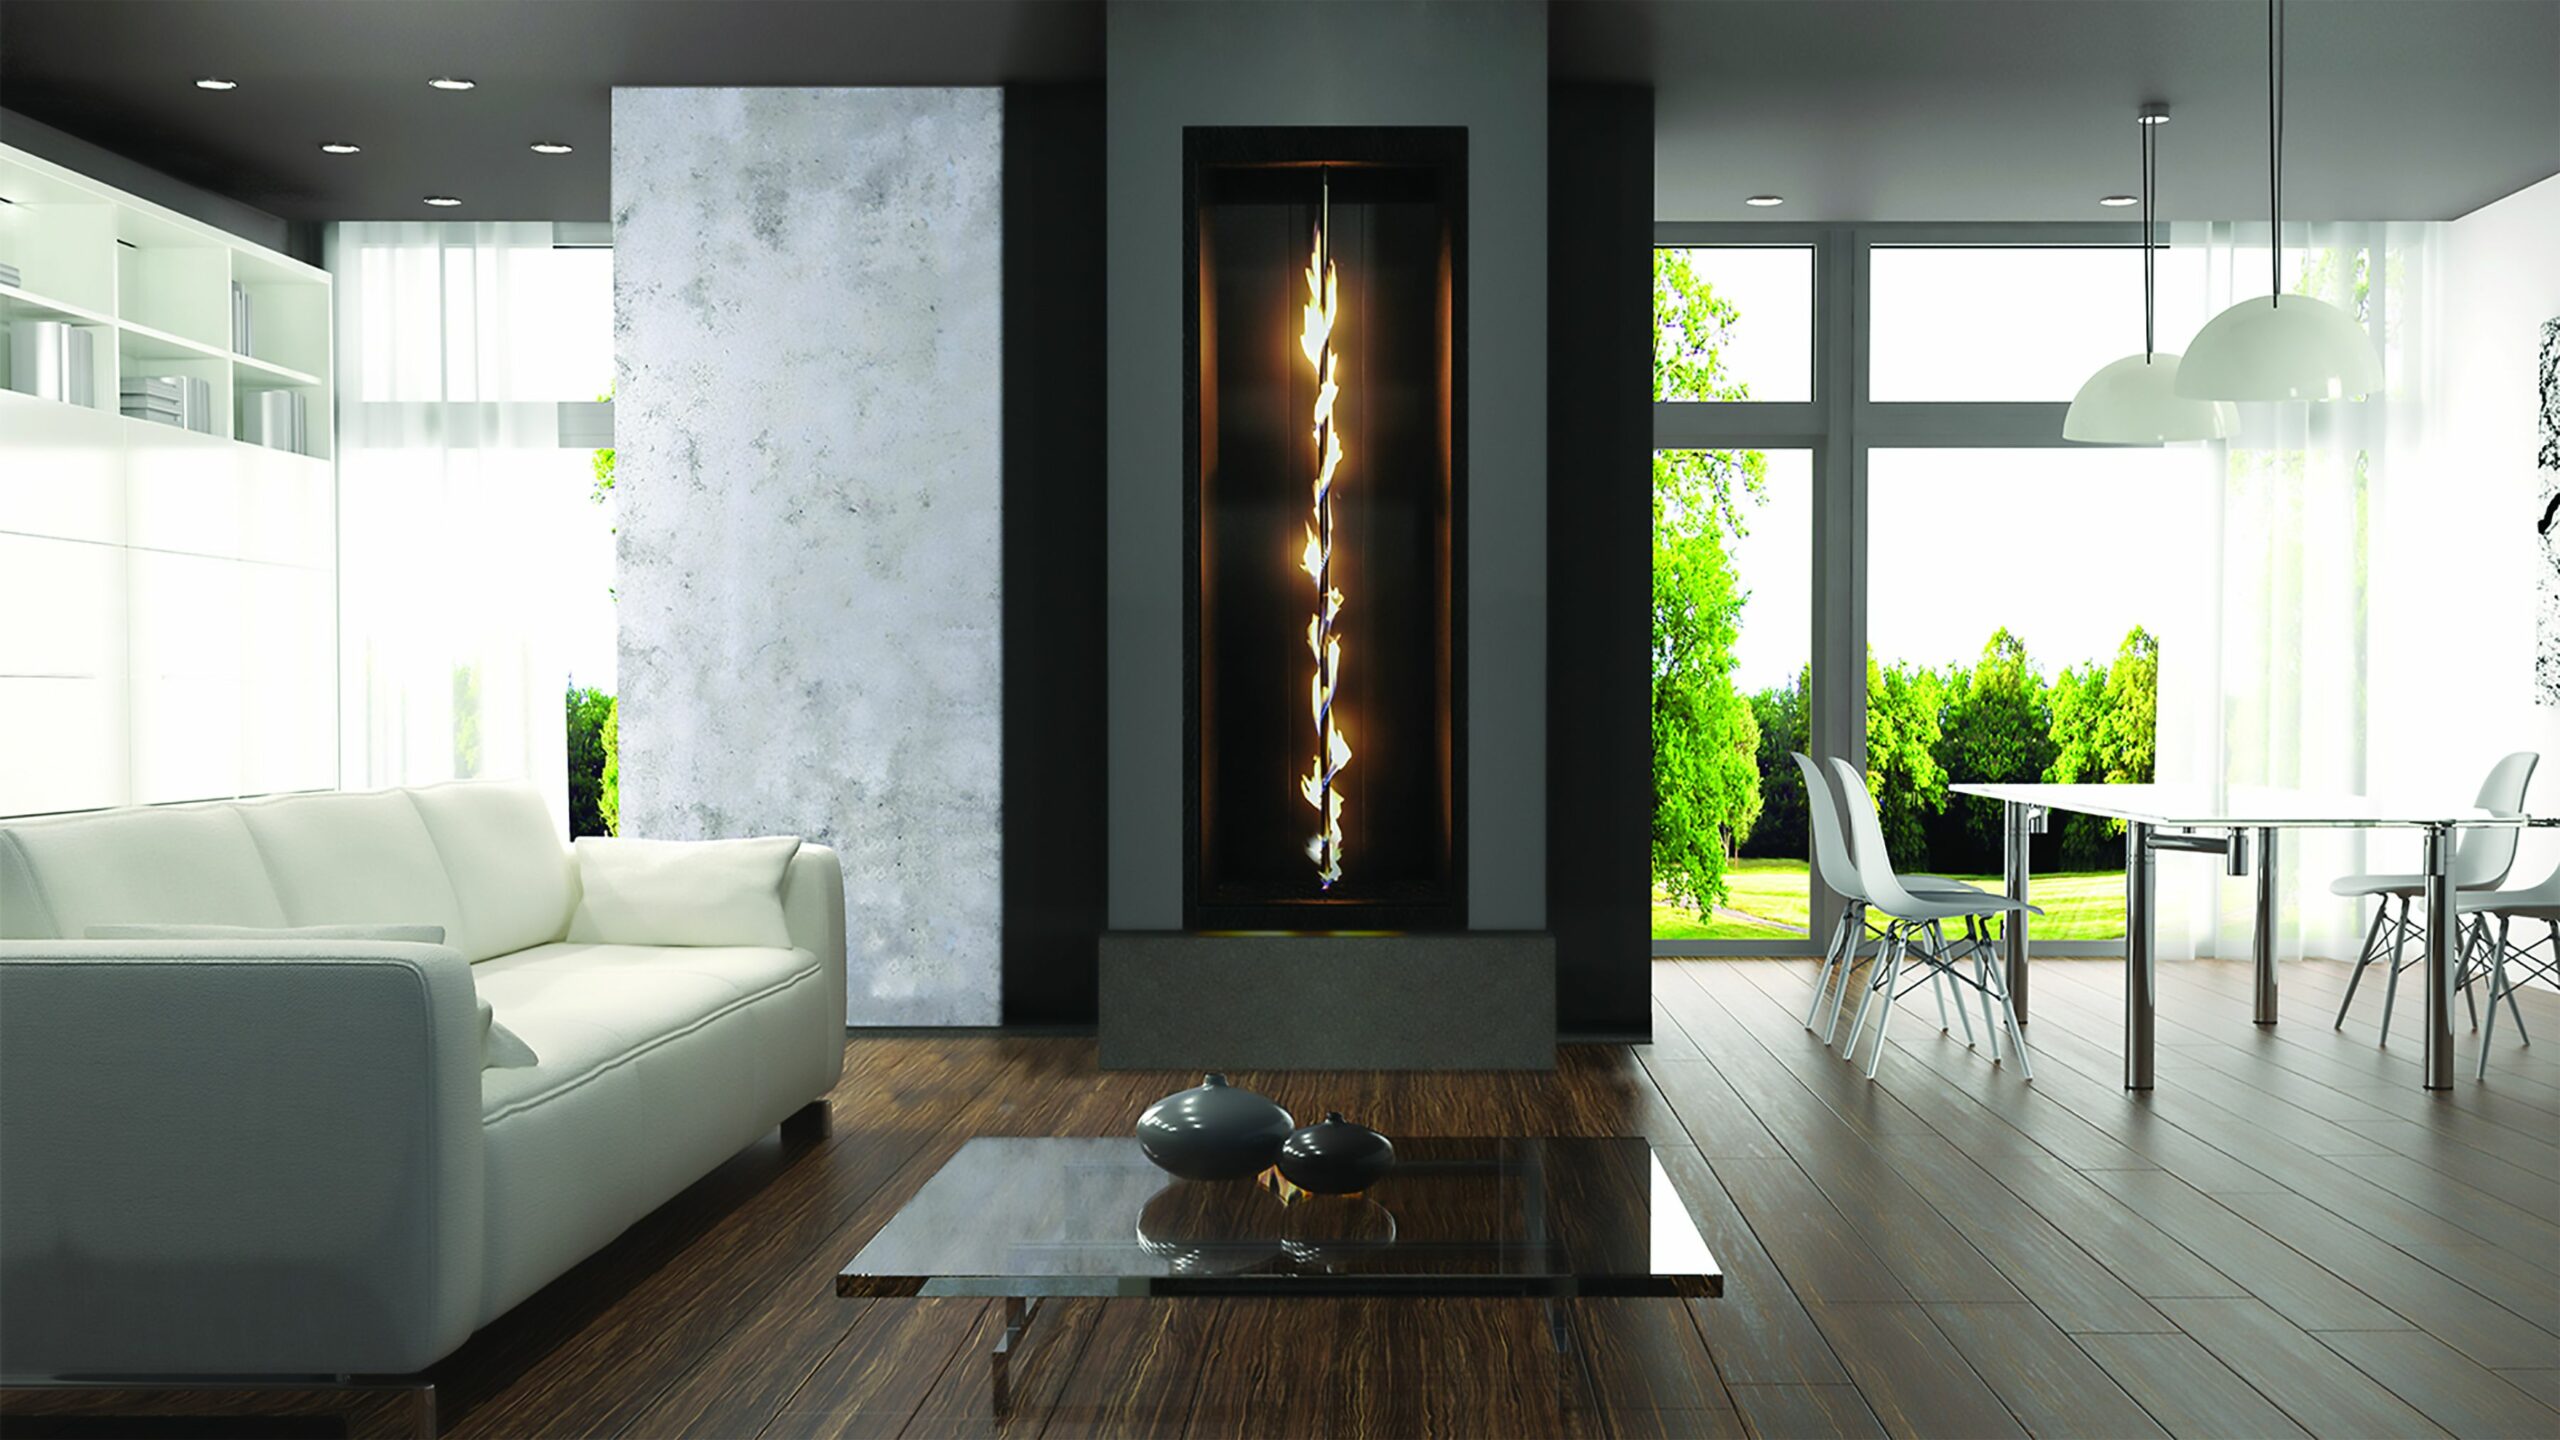 vertical pole with gas flames winding up in a large glass enclosure